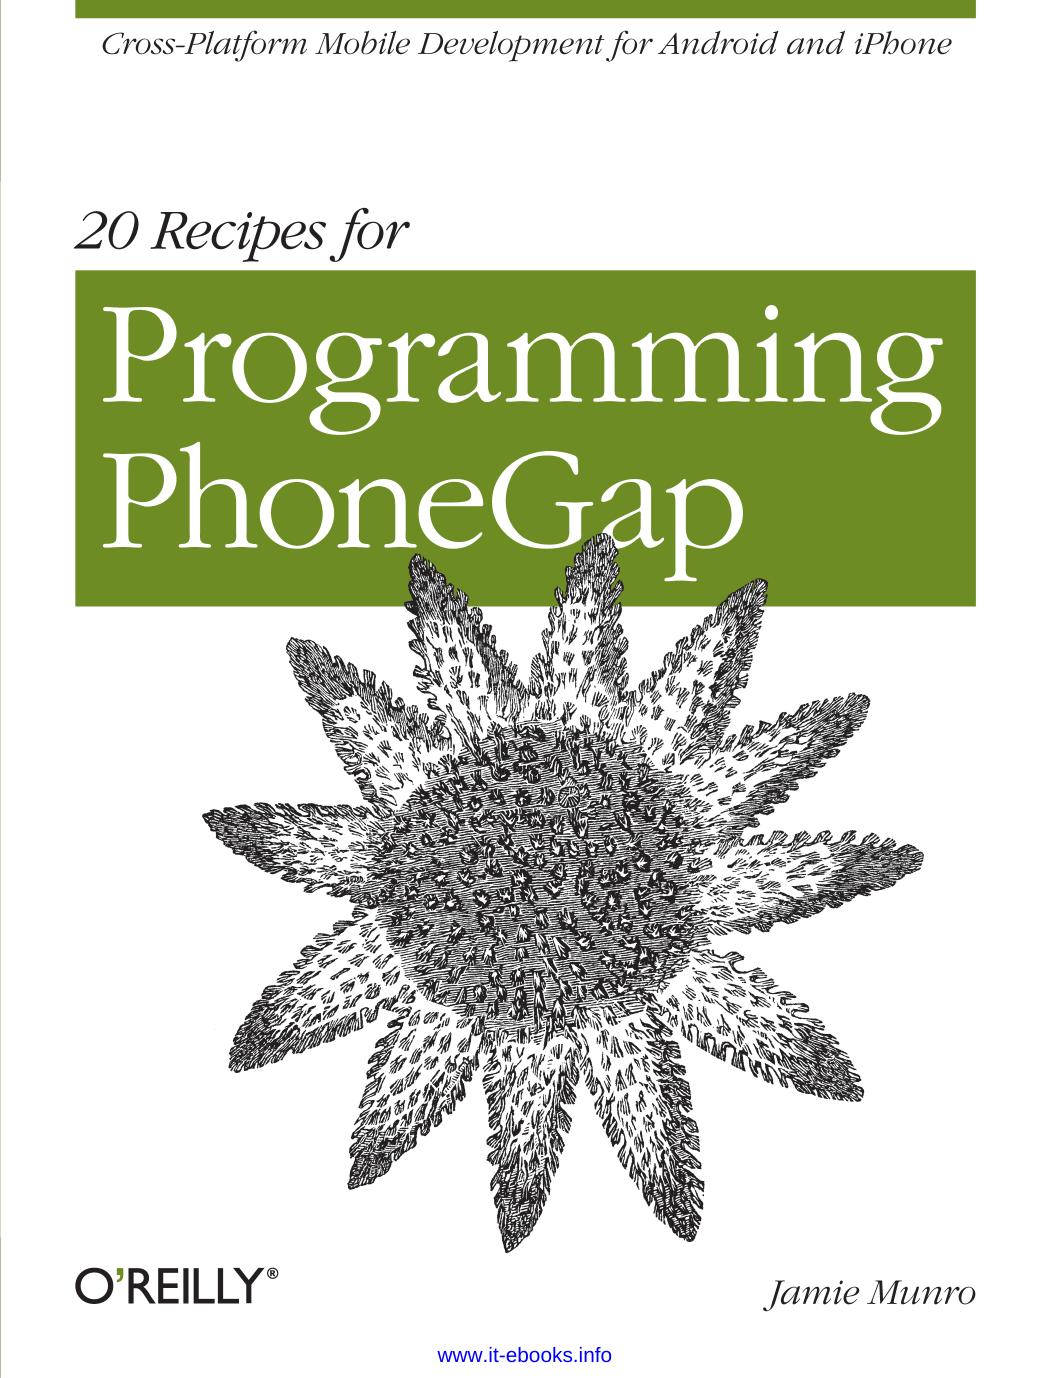 20 Recipes for Programming PhoneGap by Jamie Munro